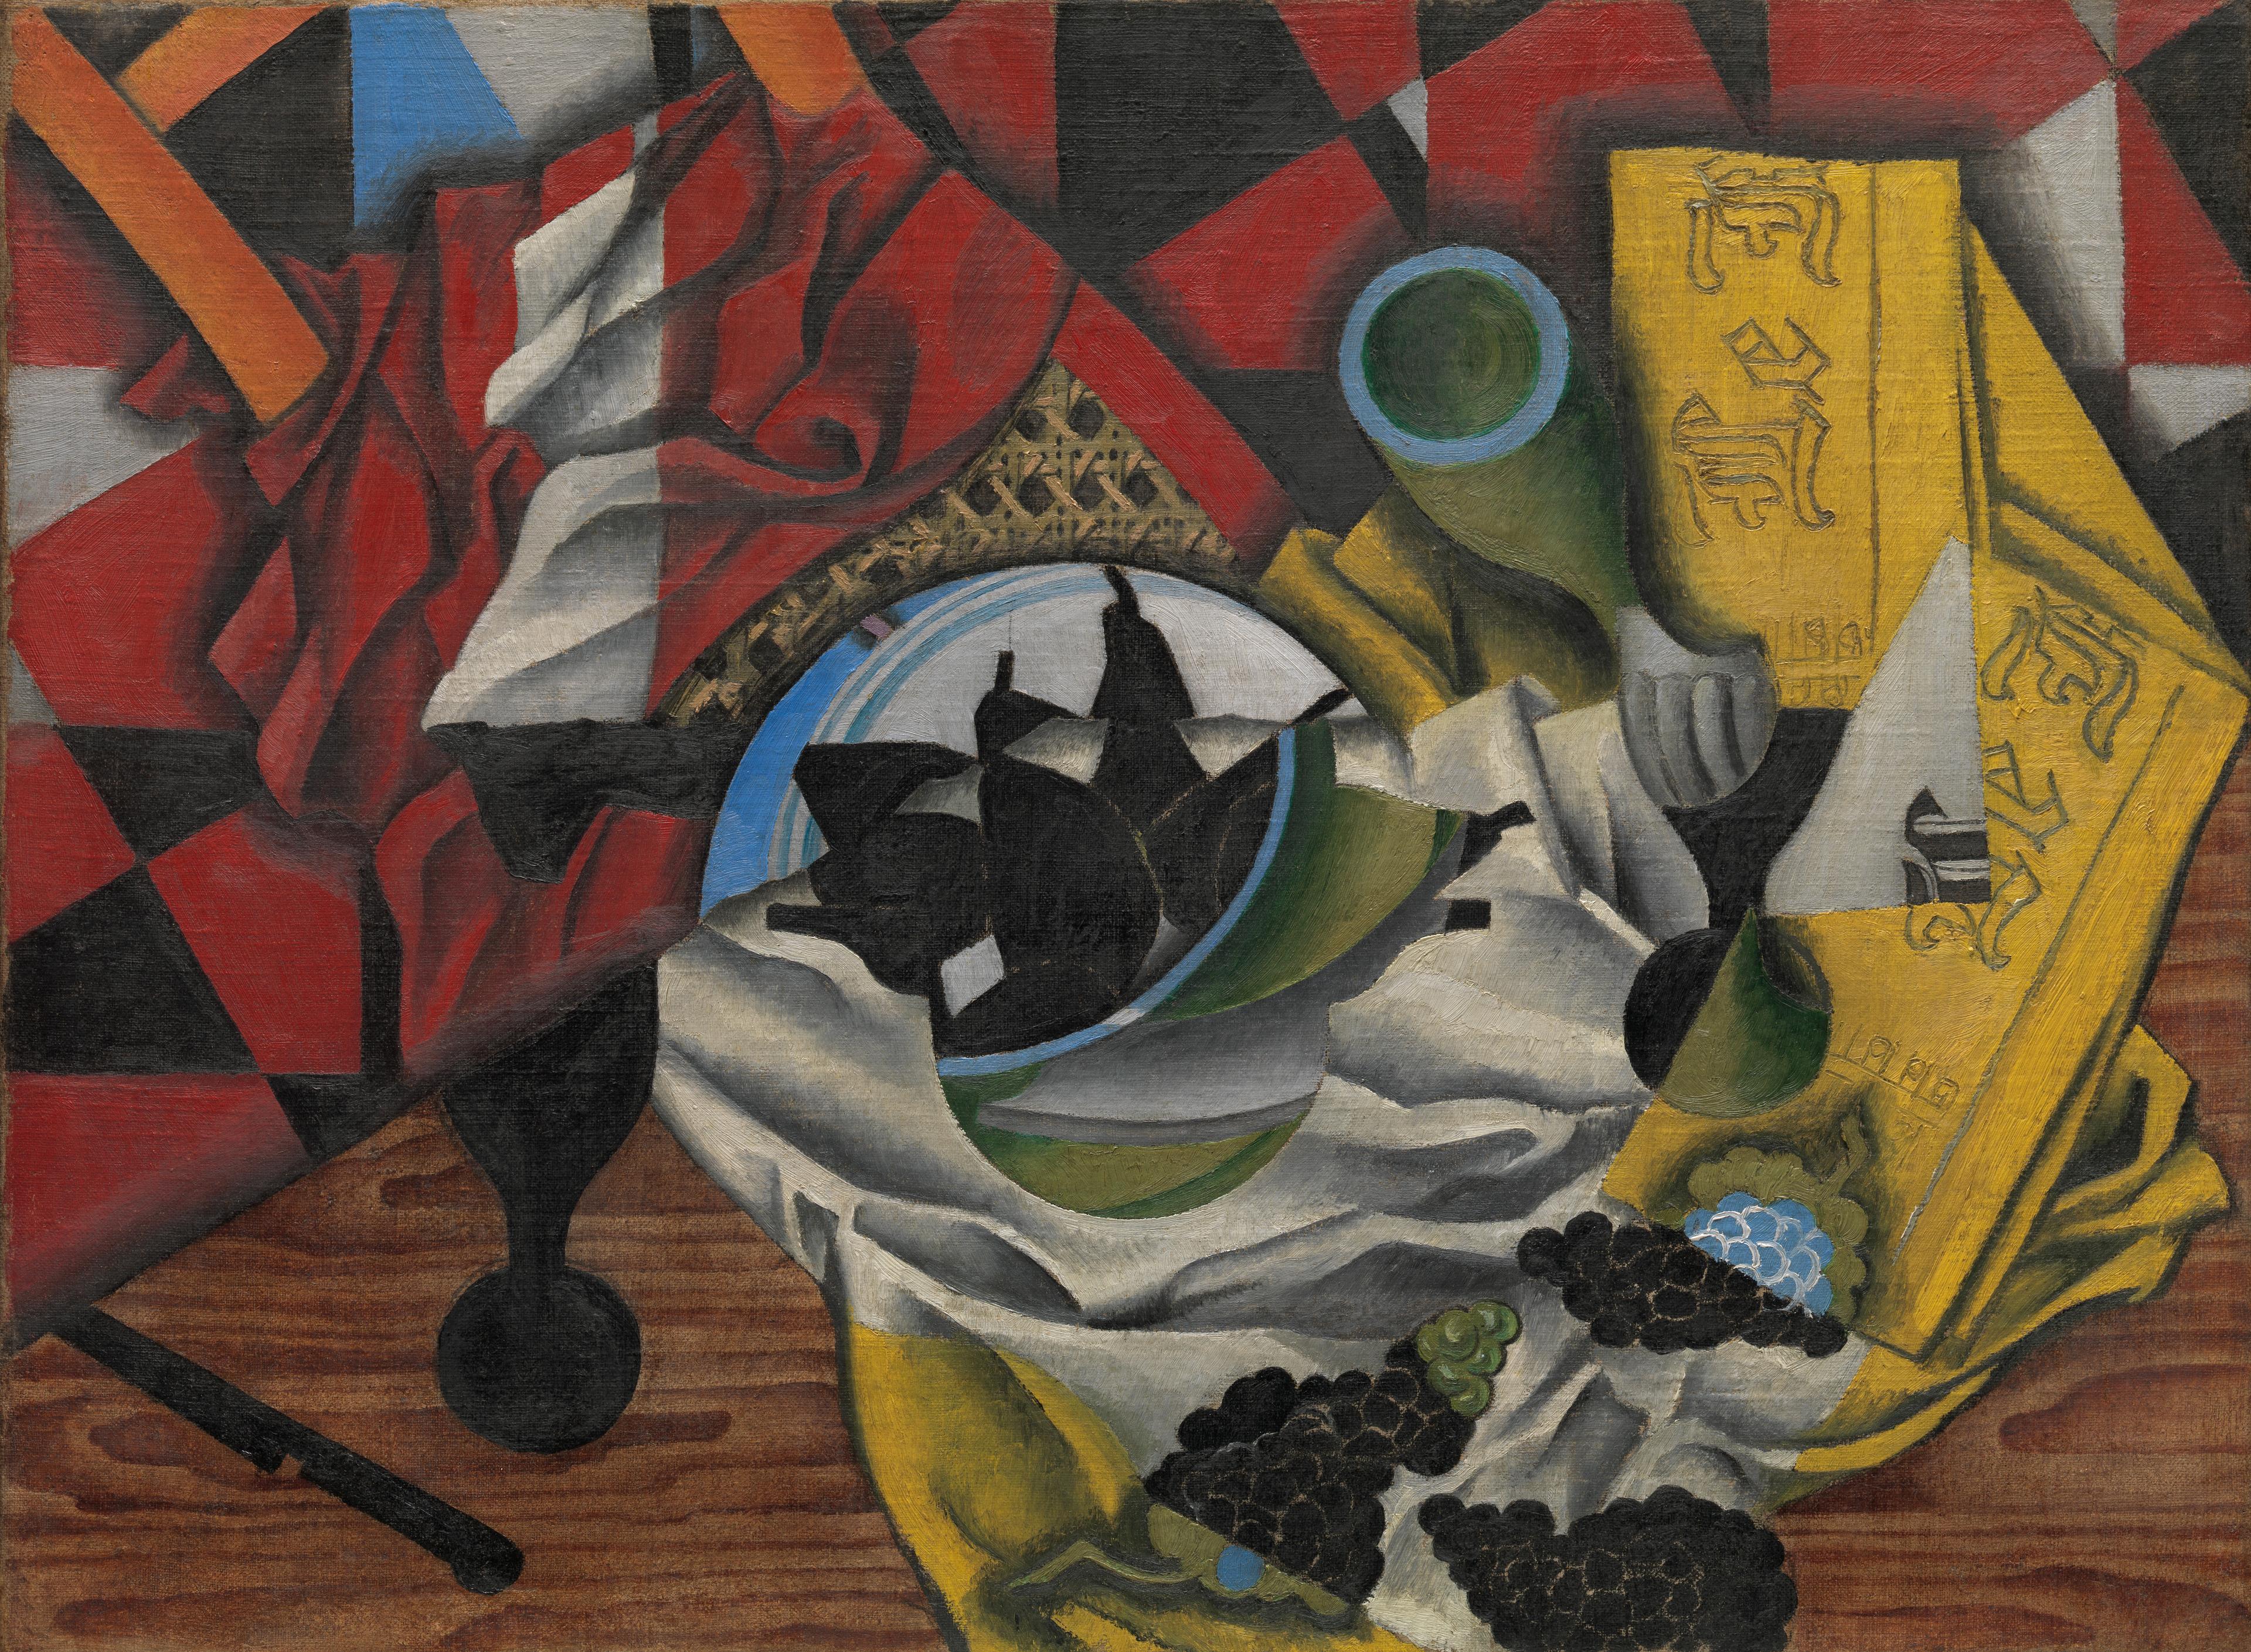 Red and yellow oil painting of a table hastily left with pears, grapes, a knife and crumpled napkin on it called "Pears and Grapes on a Table" by Juan Gris.